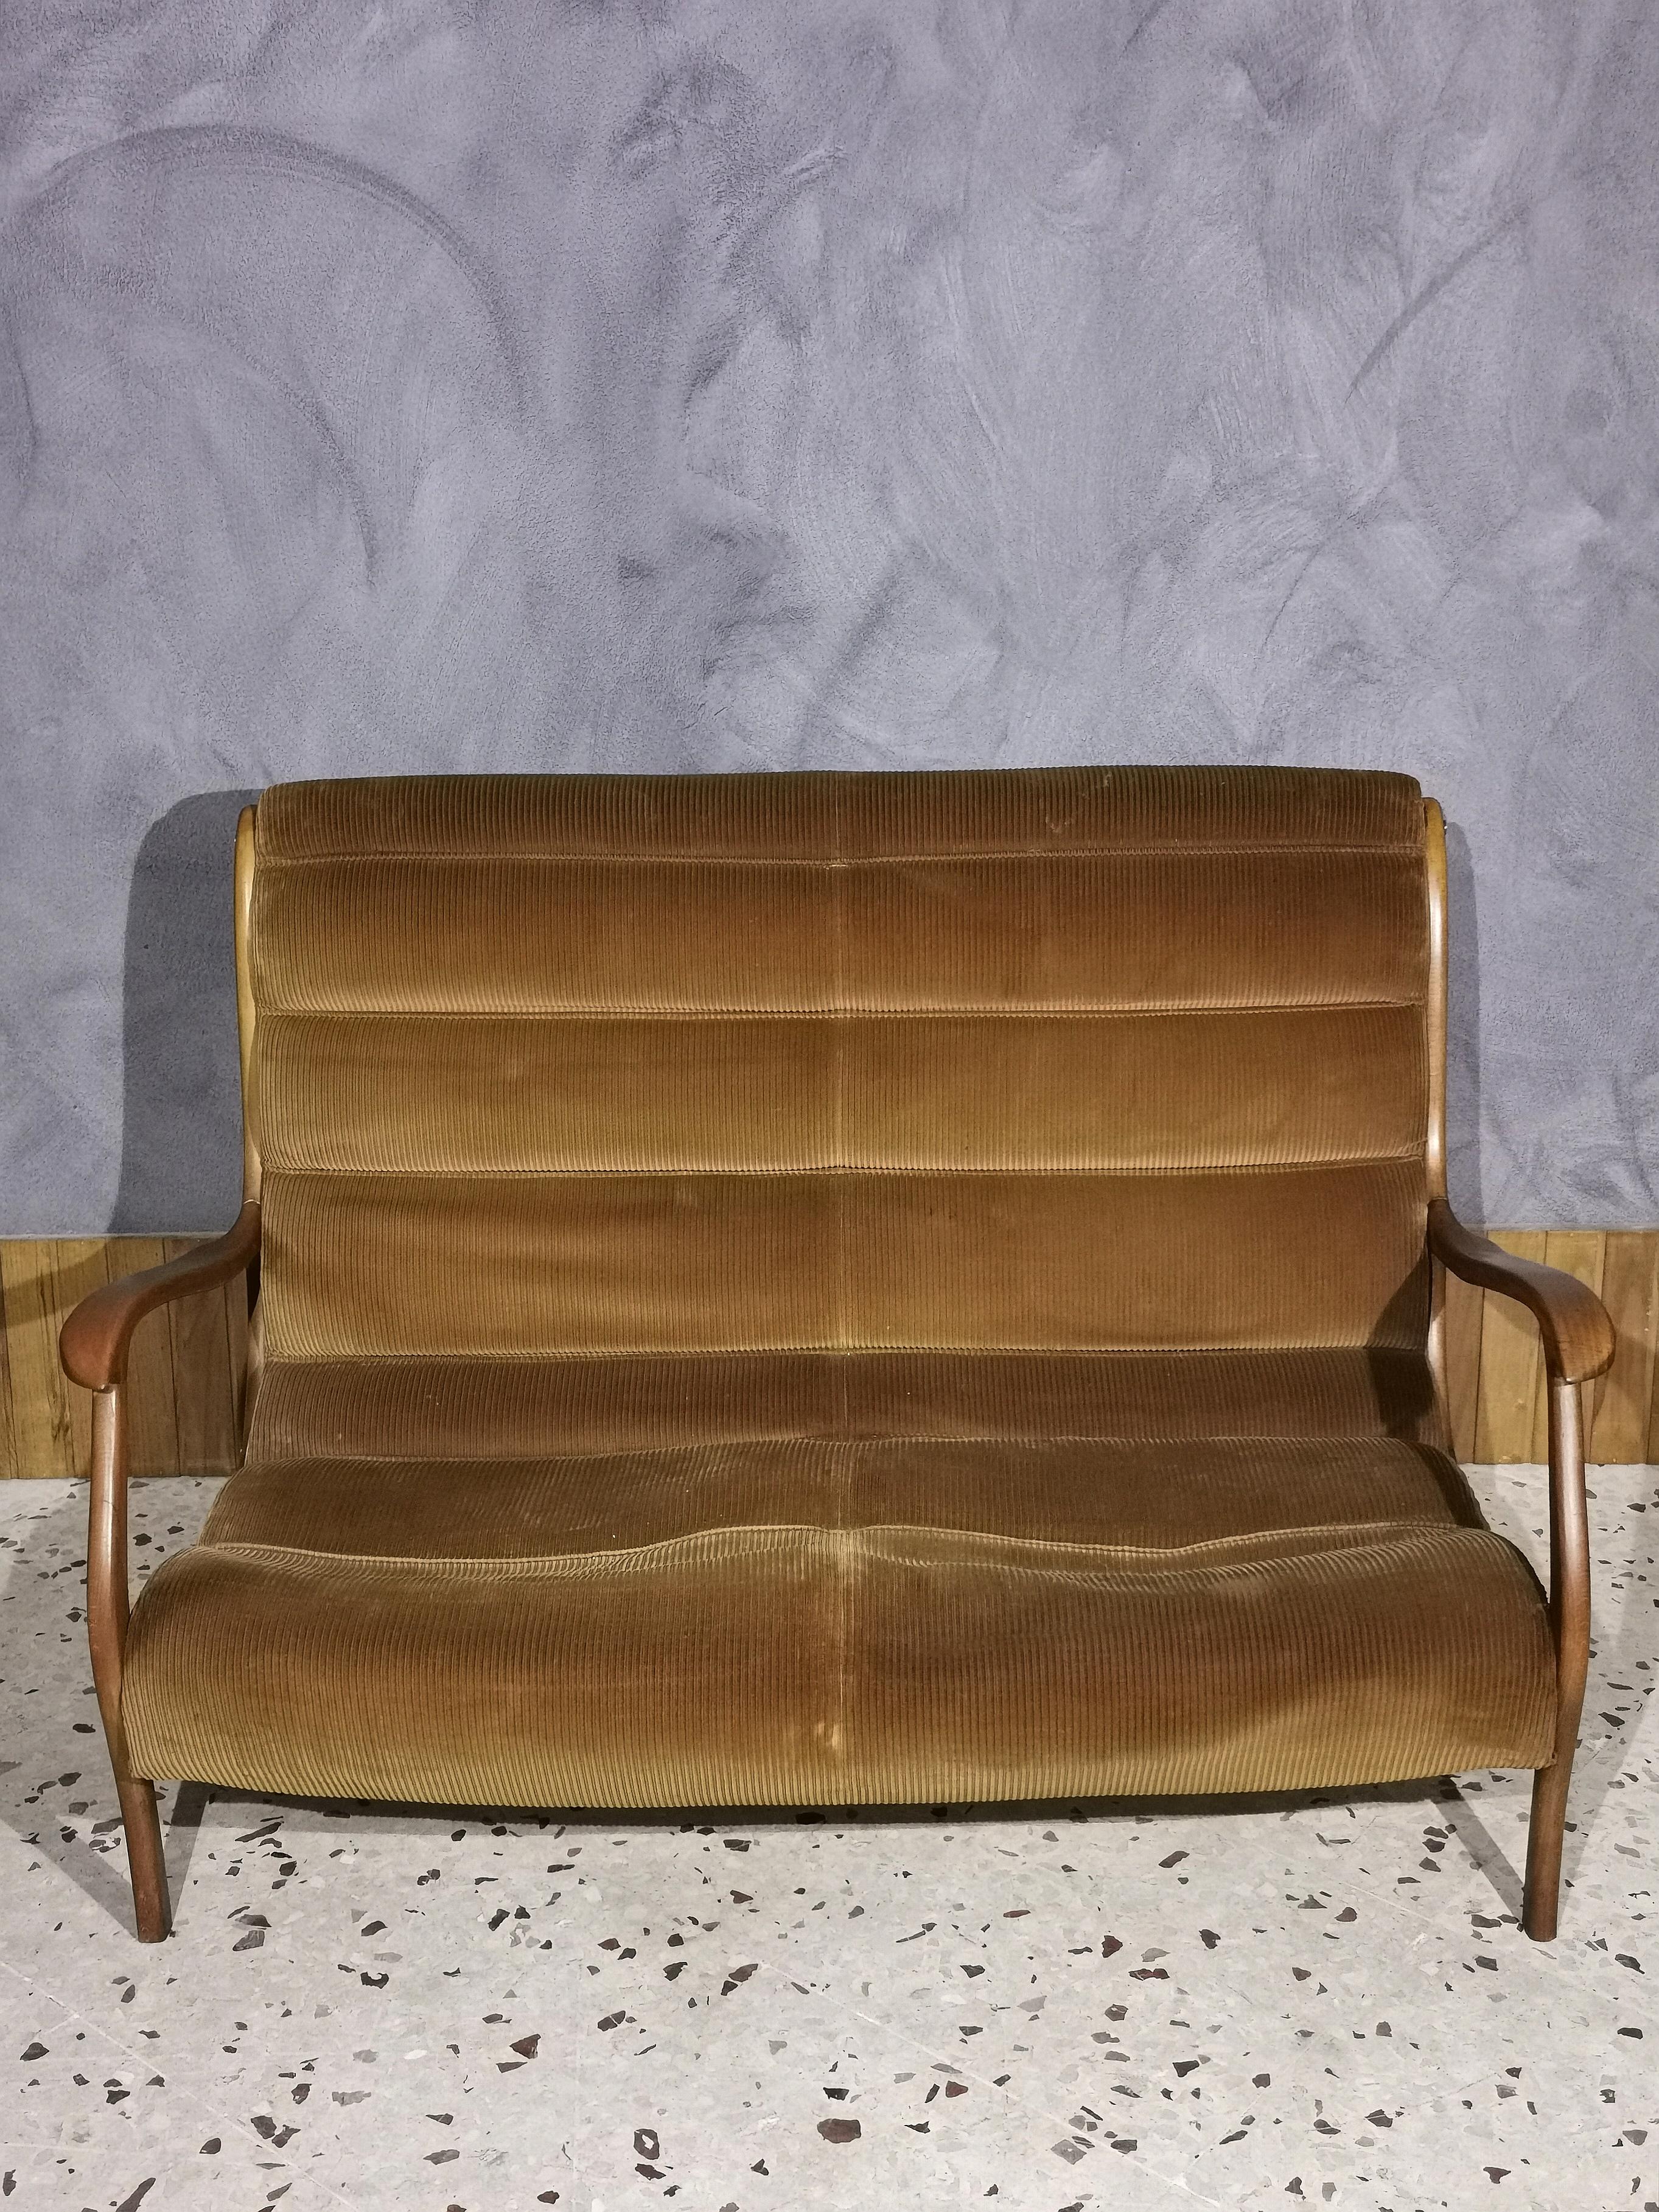 Beautiful and rare 2-seat sofa by designer Ezio Longhi for Elam from 1958, with covering
original in cognac-colored striped velvet, wooden structure and brass finishes, Italy.